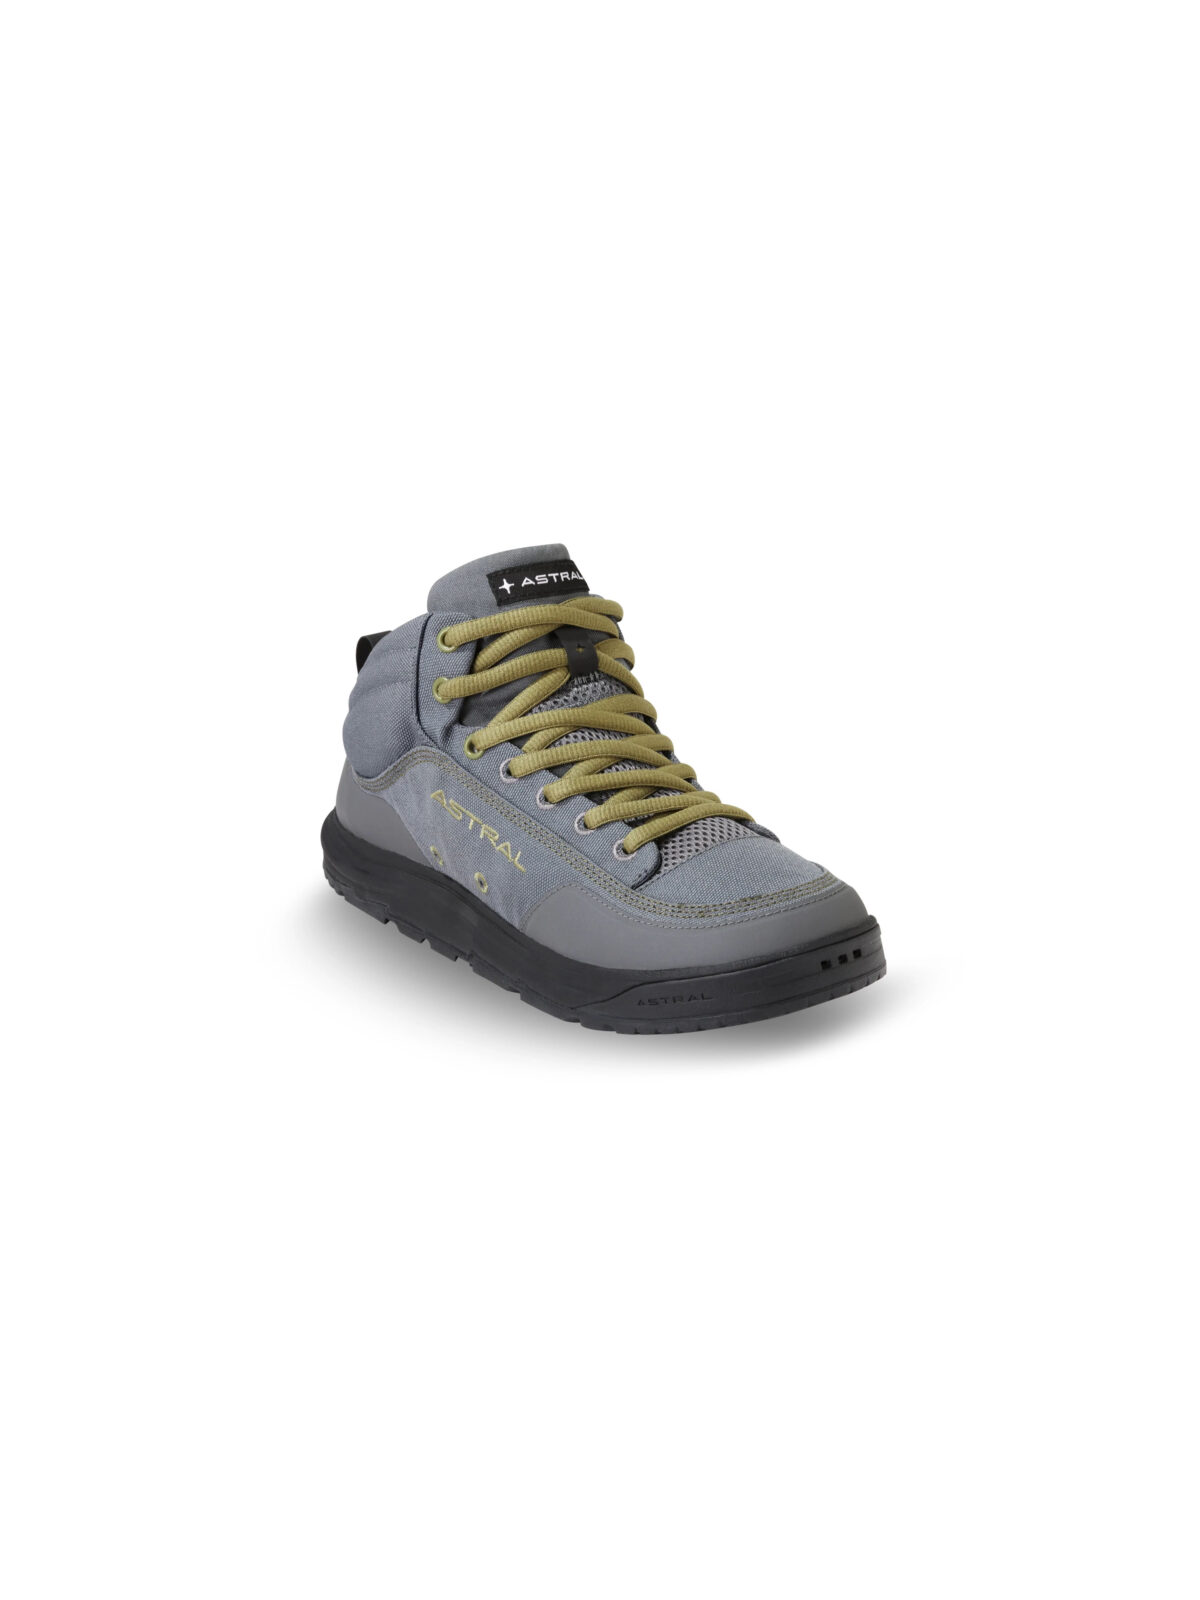 Astral Shoes Rassler 2.0 Grey Angled